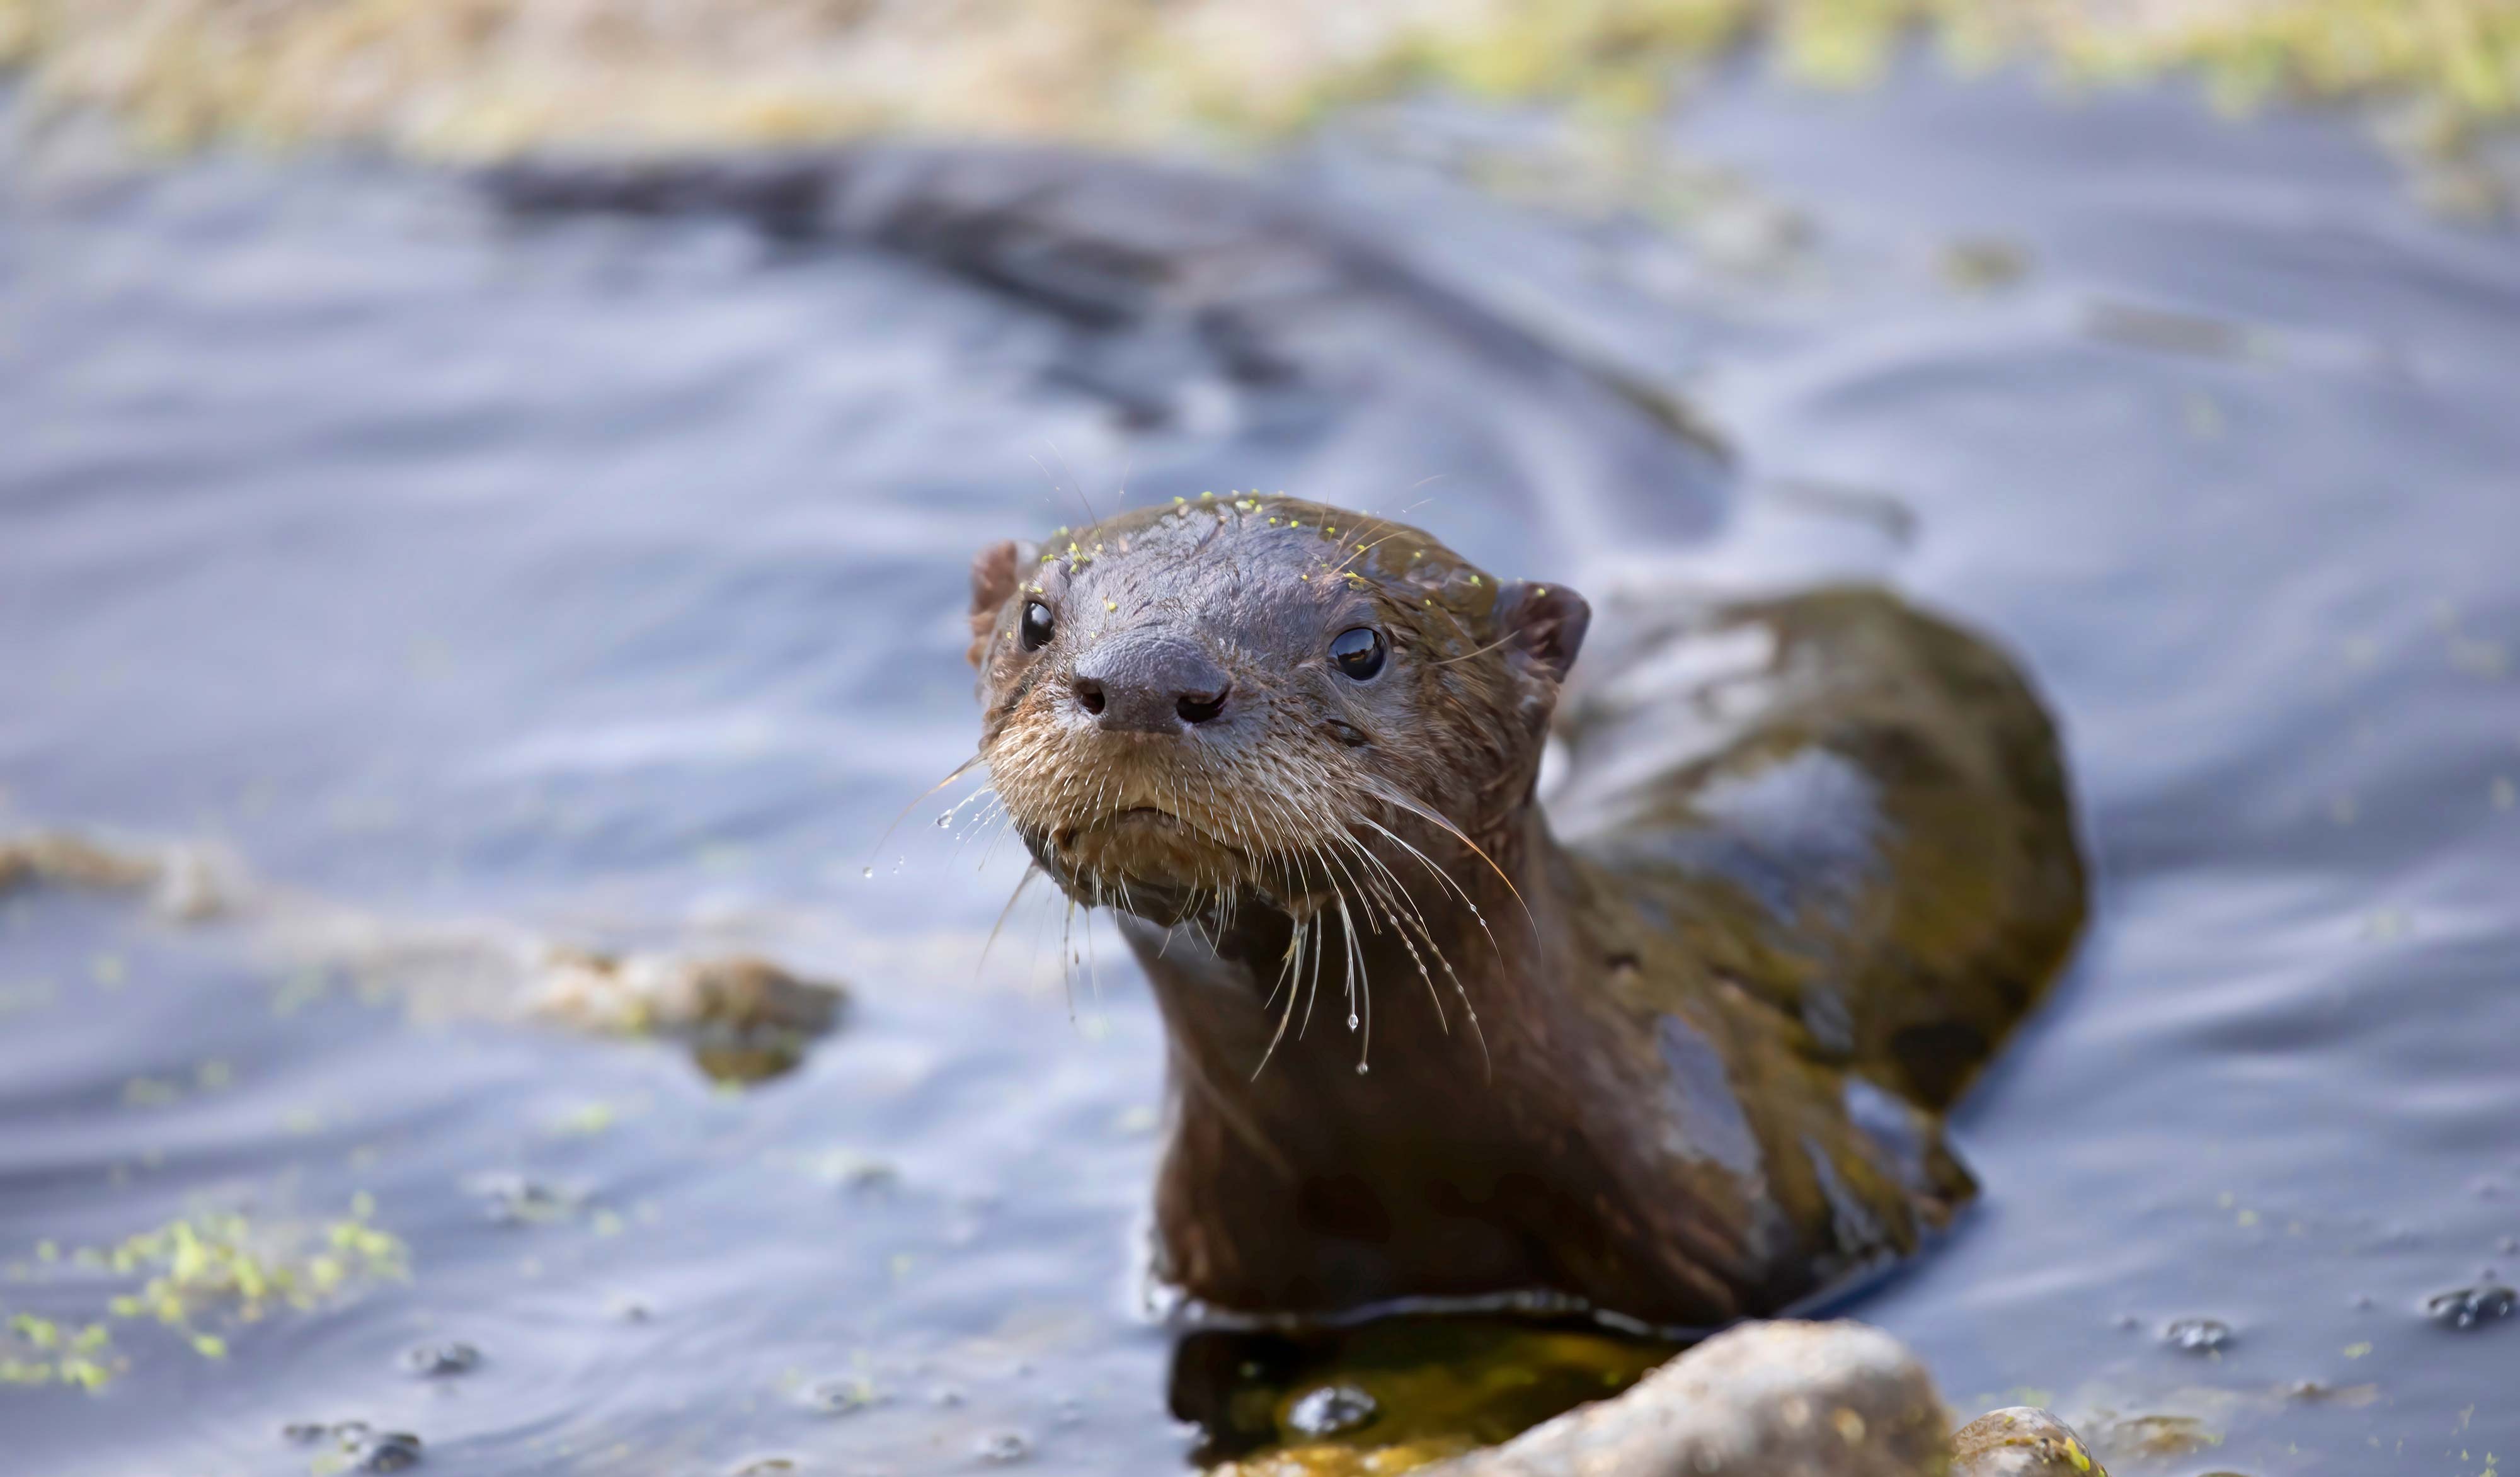 A river otter poking out of the water.